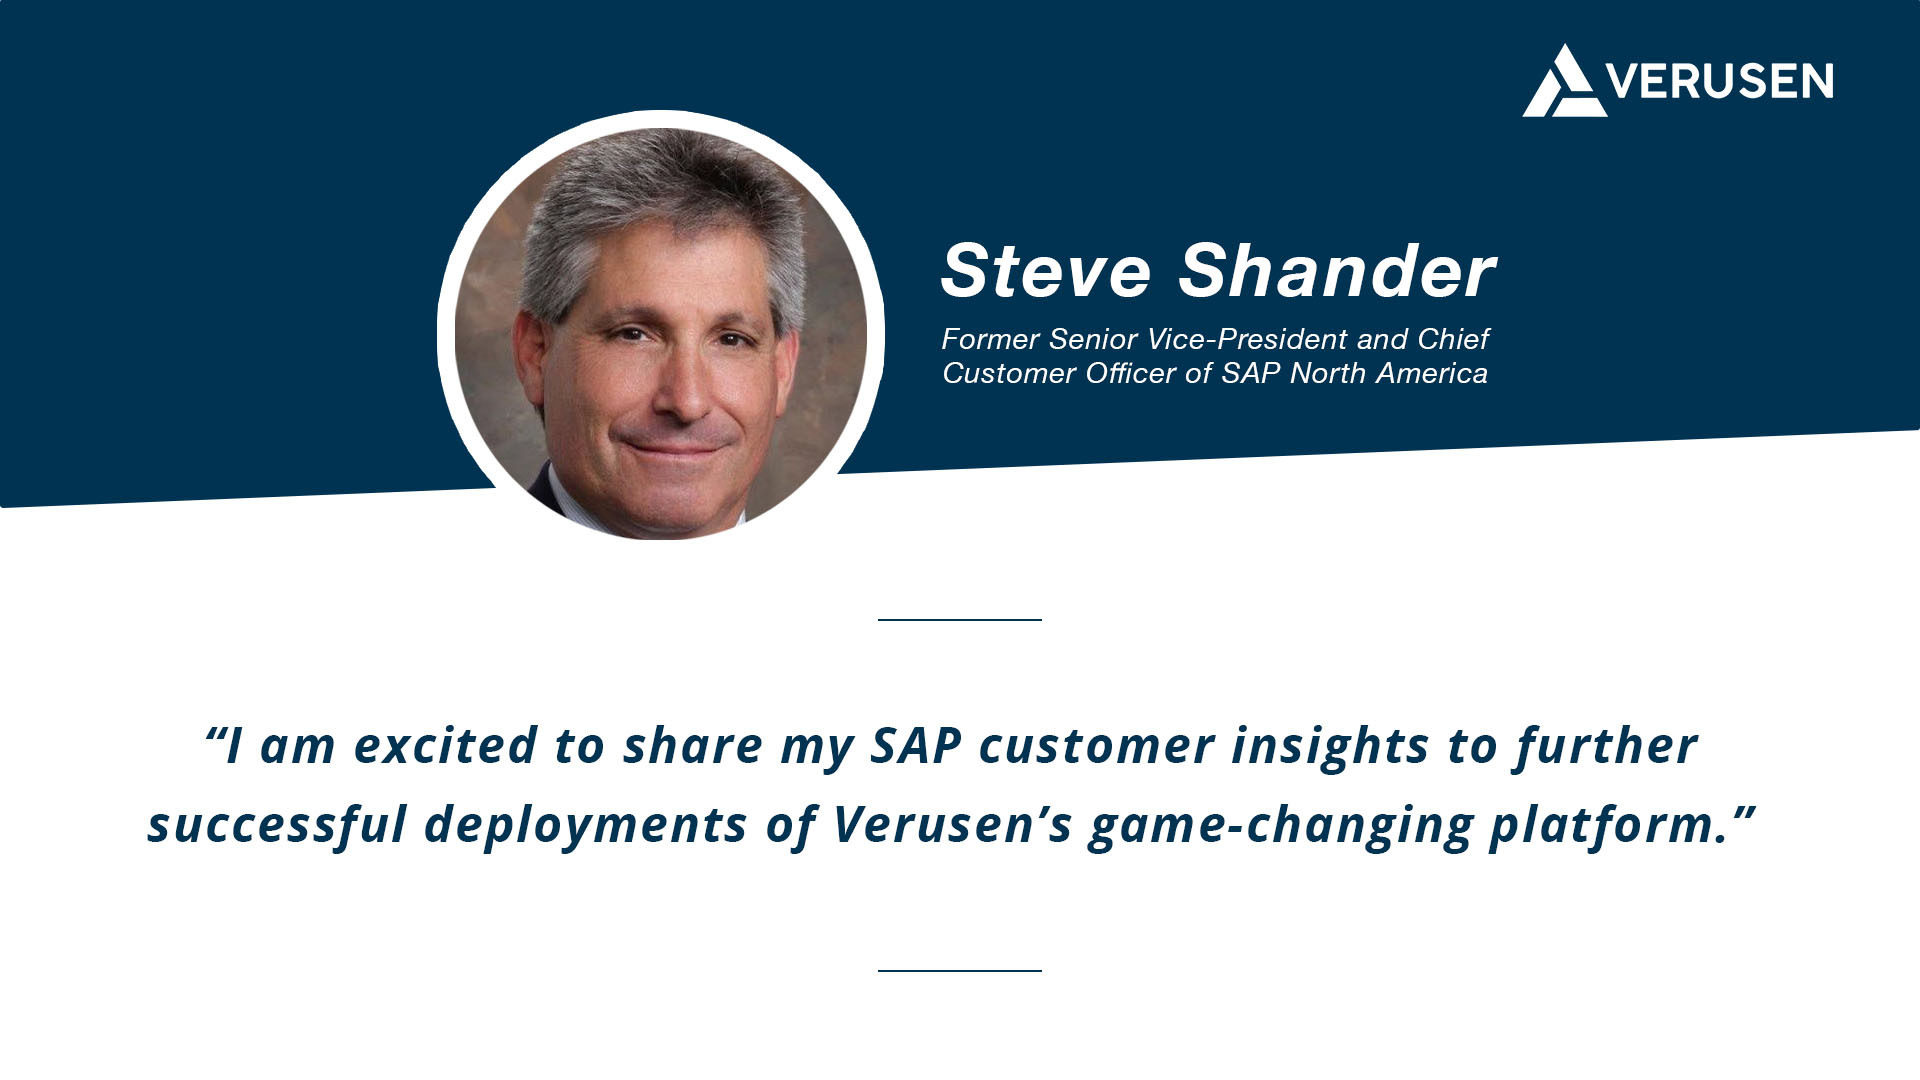 Steve Shander brings over 30 years of value-creating customer experience insights to Verusen’s Board

